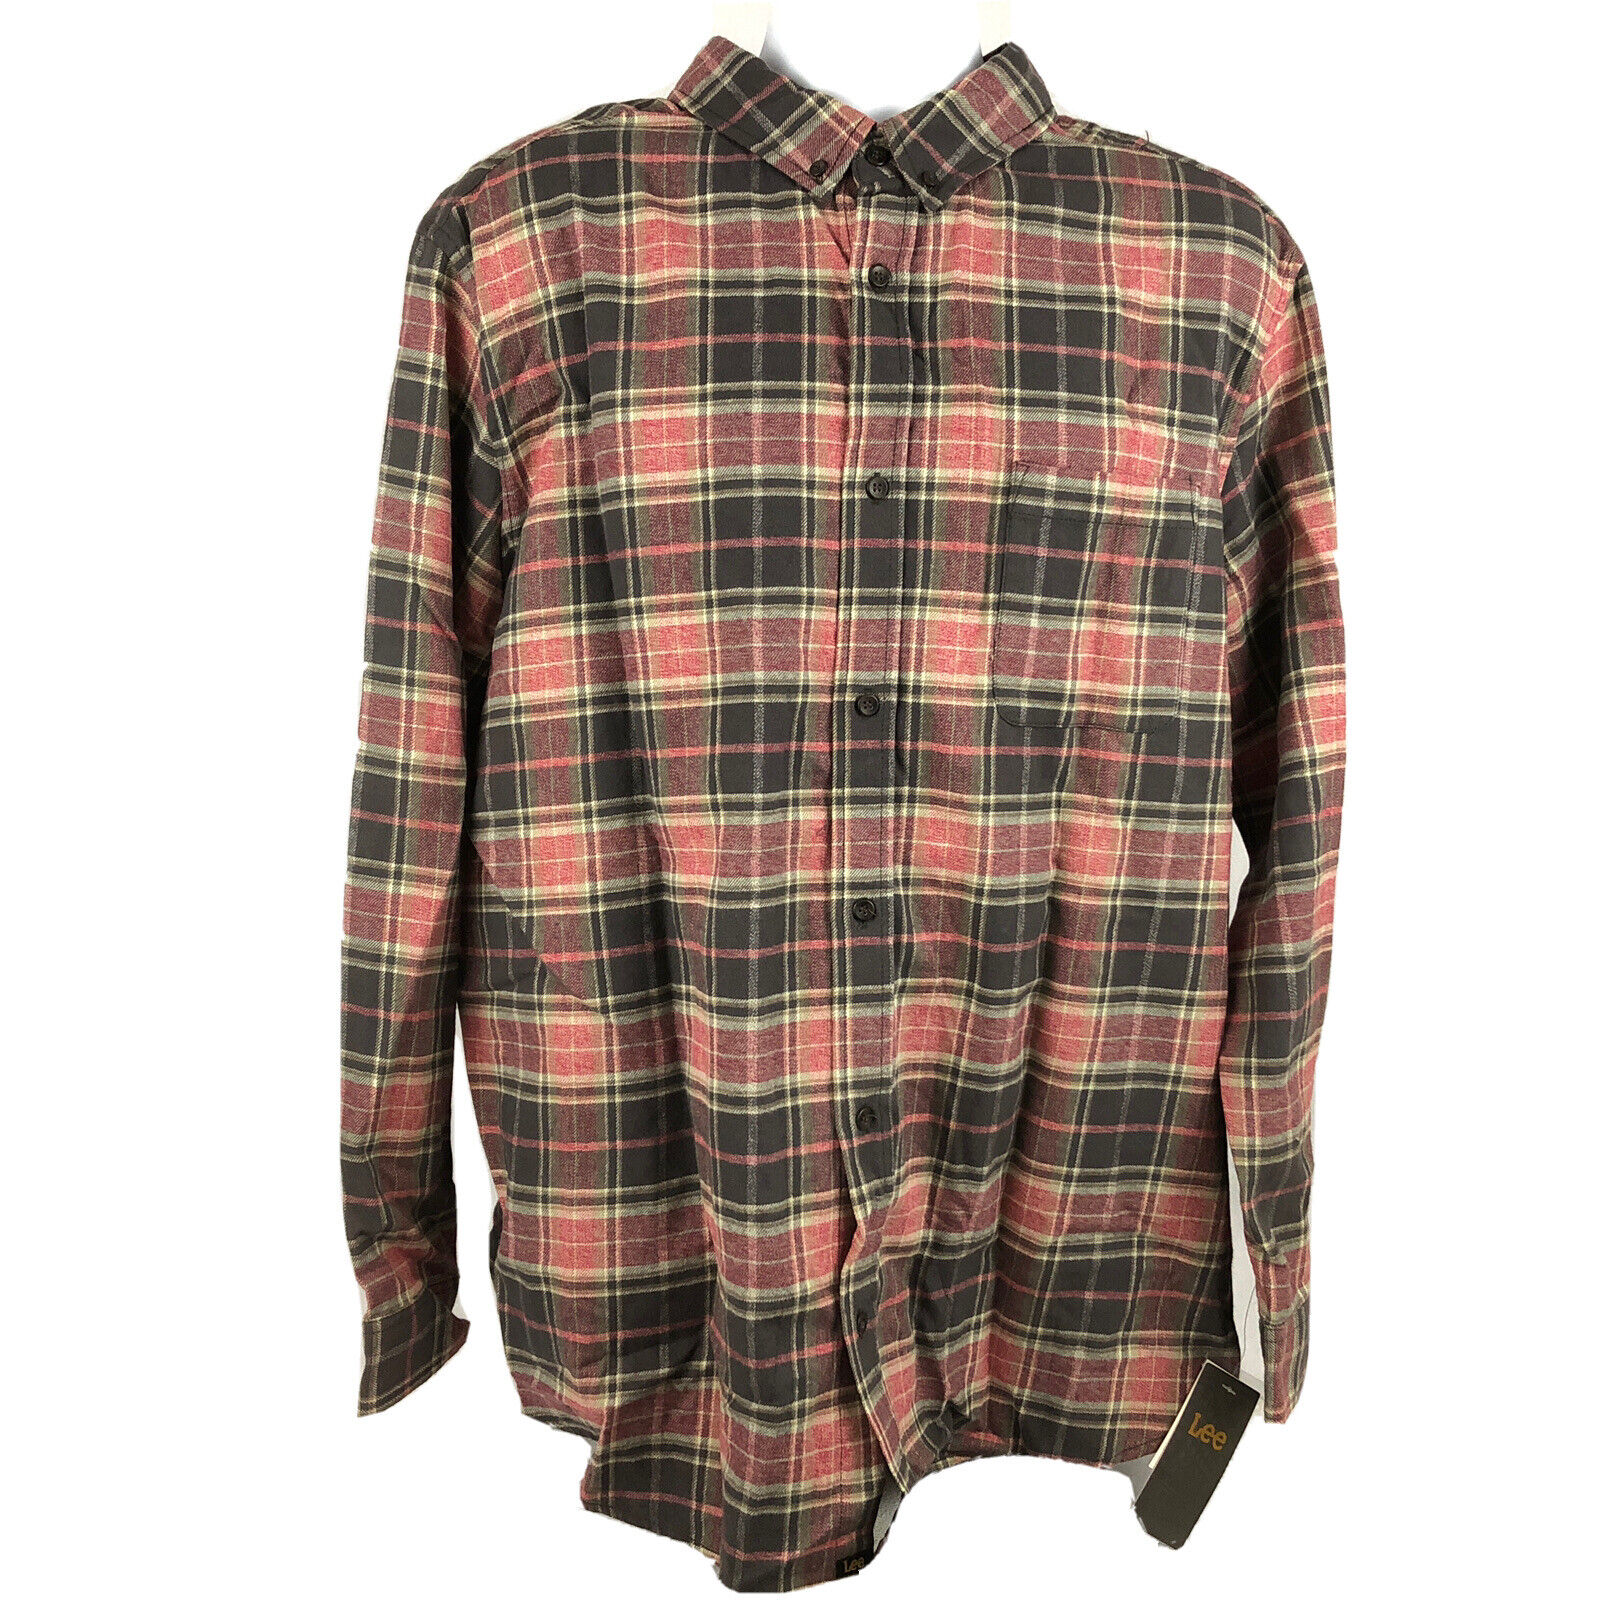 LEE Mens Plaid Flannel Shirt Size XXL New With Tags Long Sleeve Lumberjack